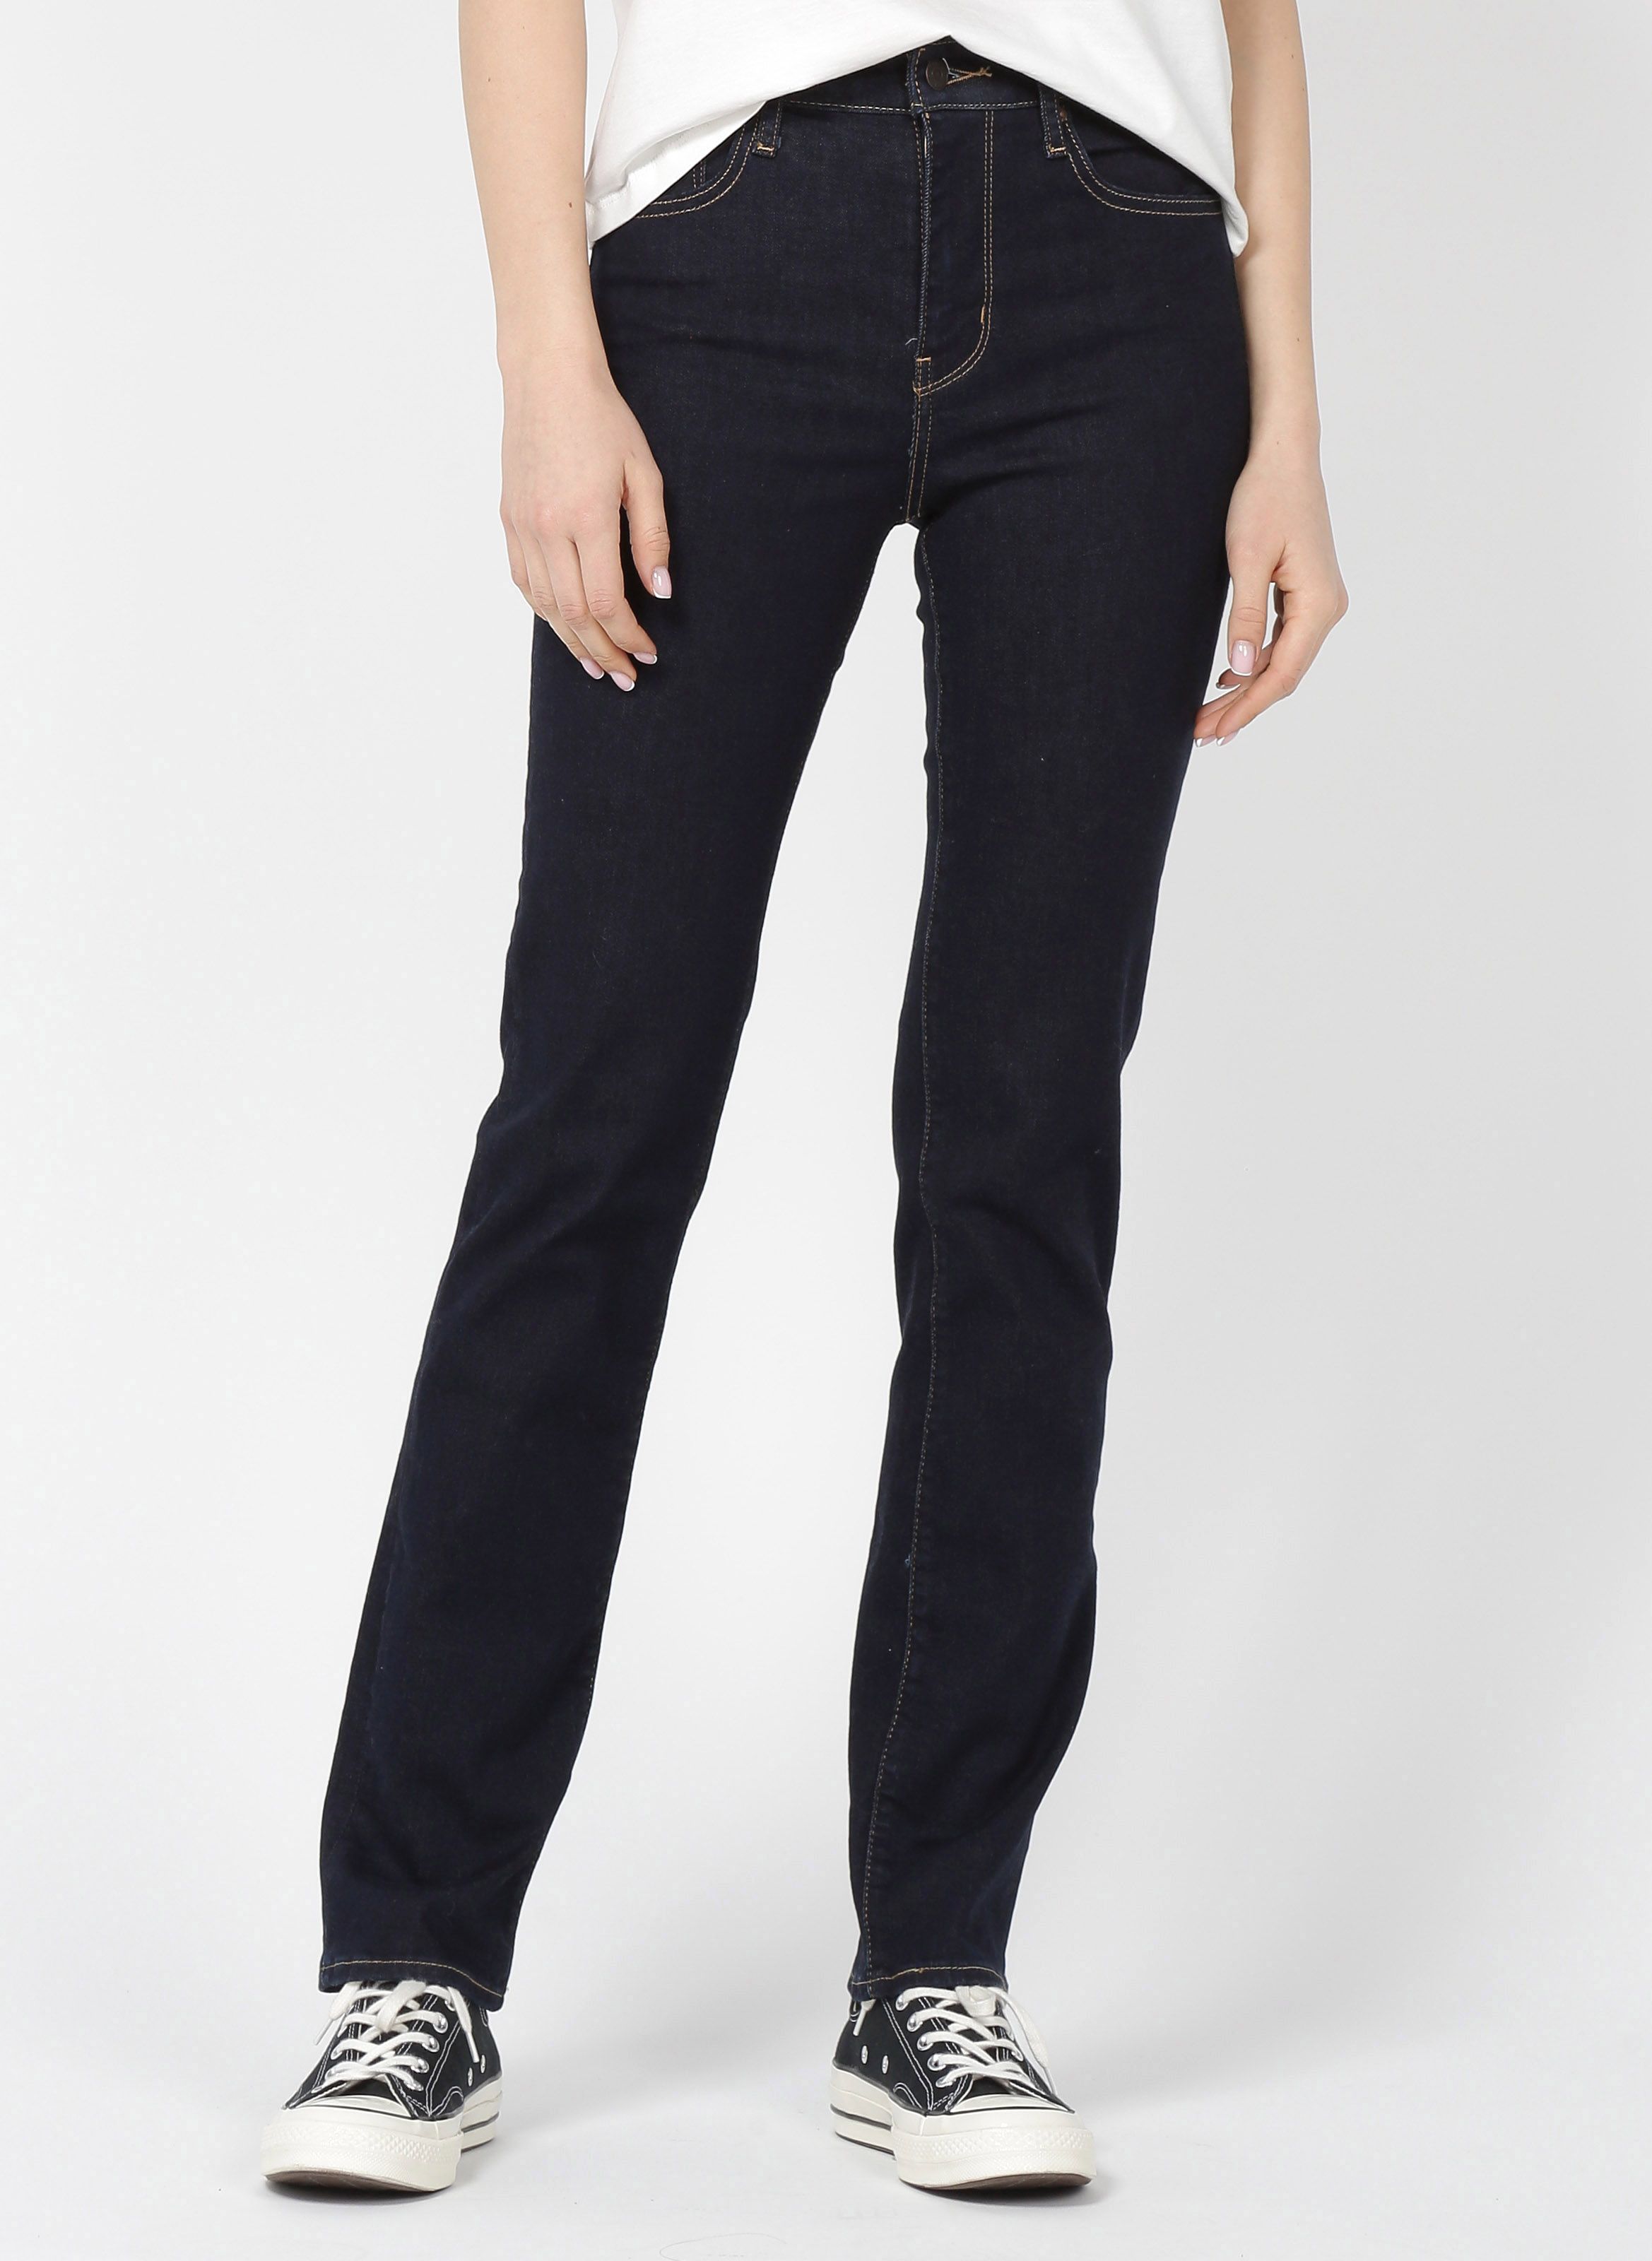 Sale 724 High-waist Slim-fit Jeans To 